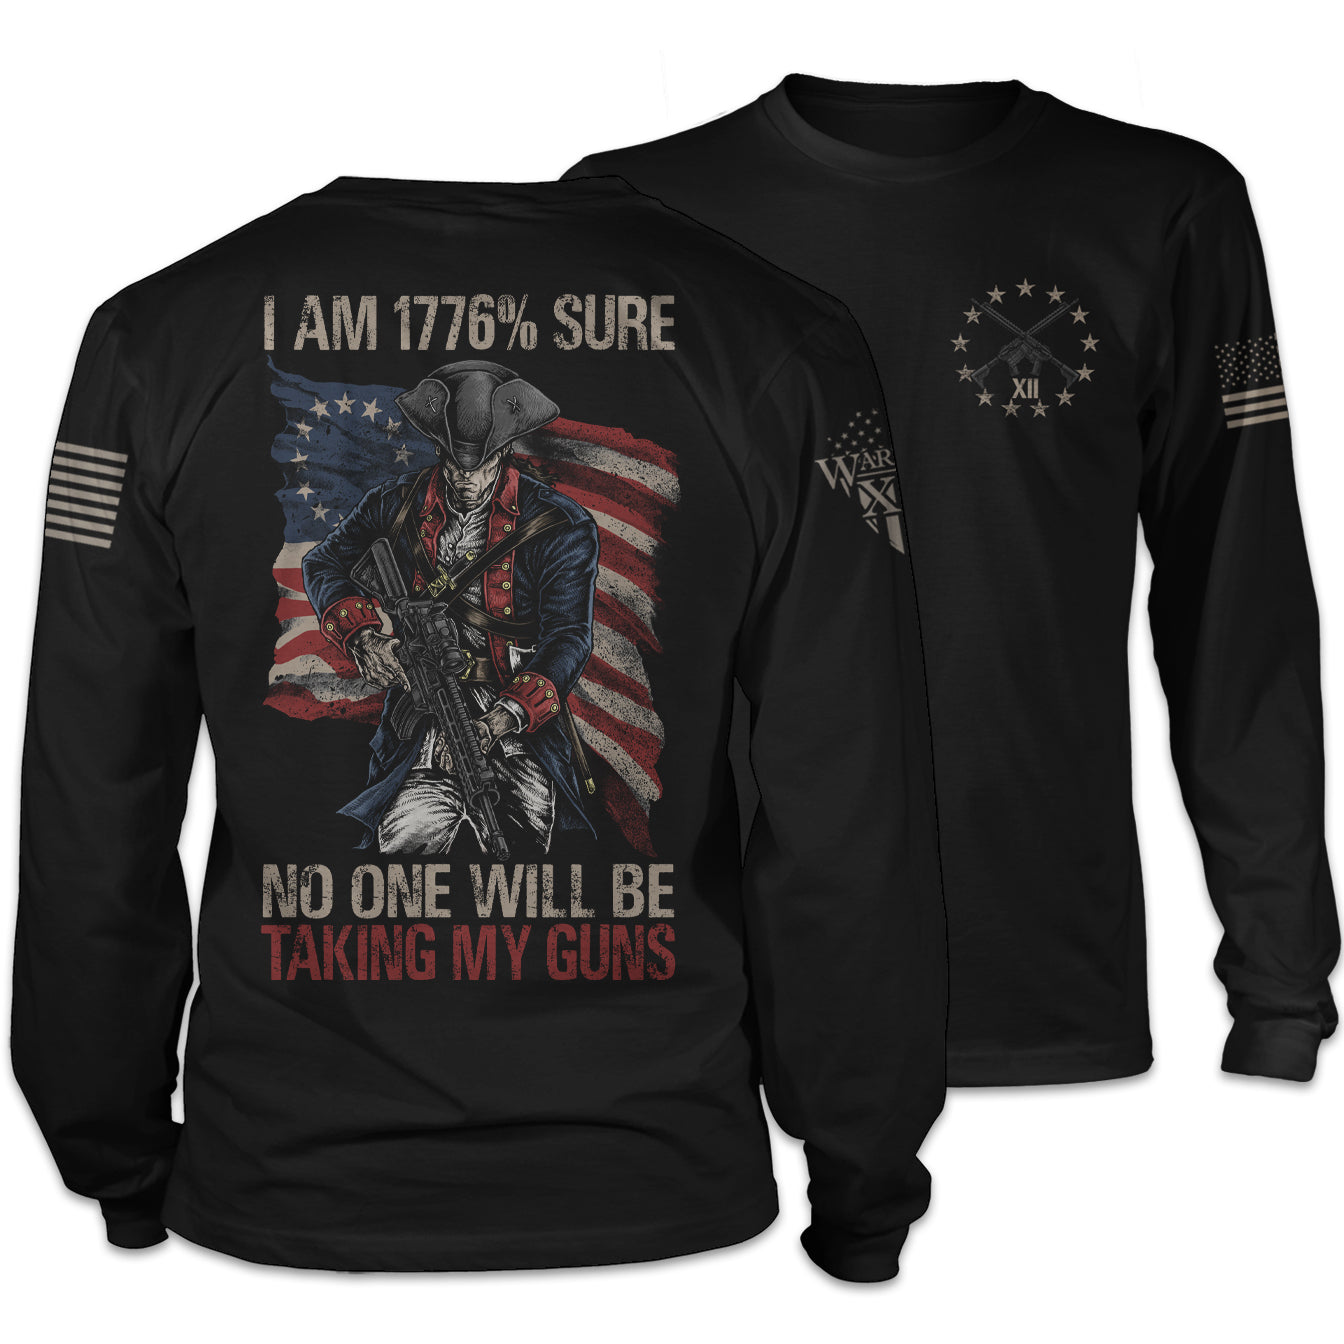 Front & back black long sleeve shirt with the "1776% Sure No One Will Be Taking My Guns."